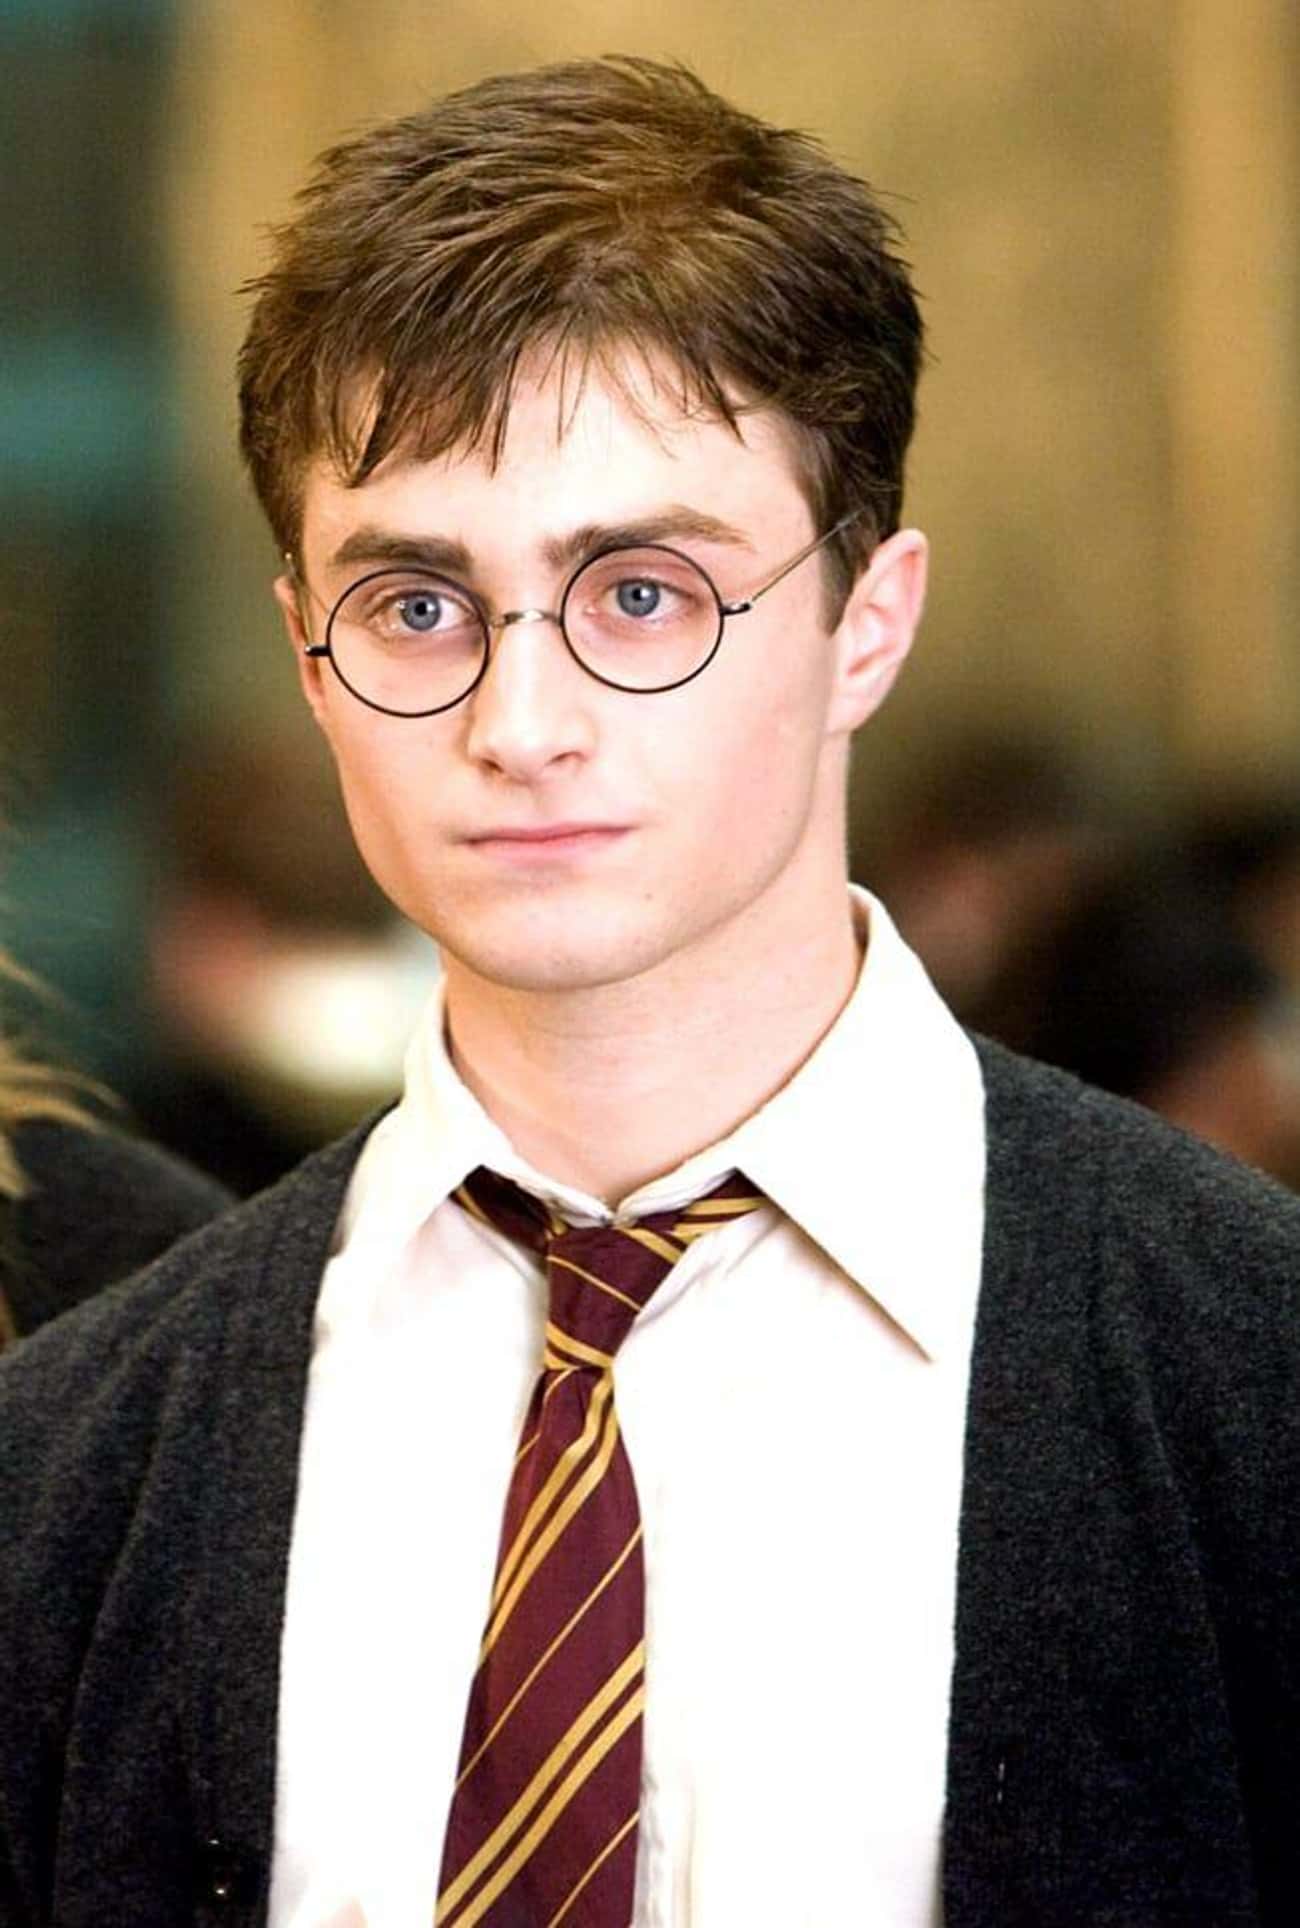 Harry Potter In The Movies: Able-Bodied, Blue-Eyed Athlete